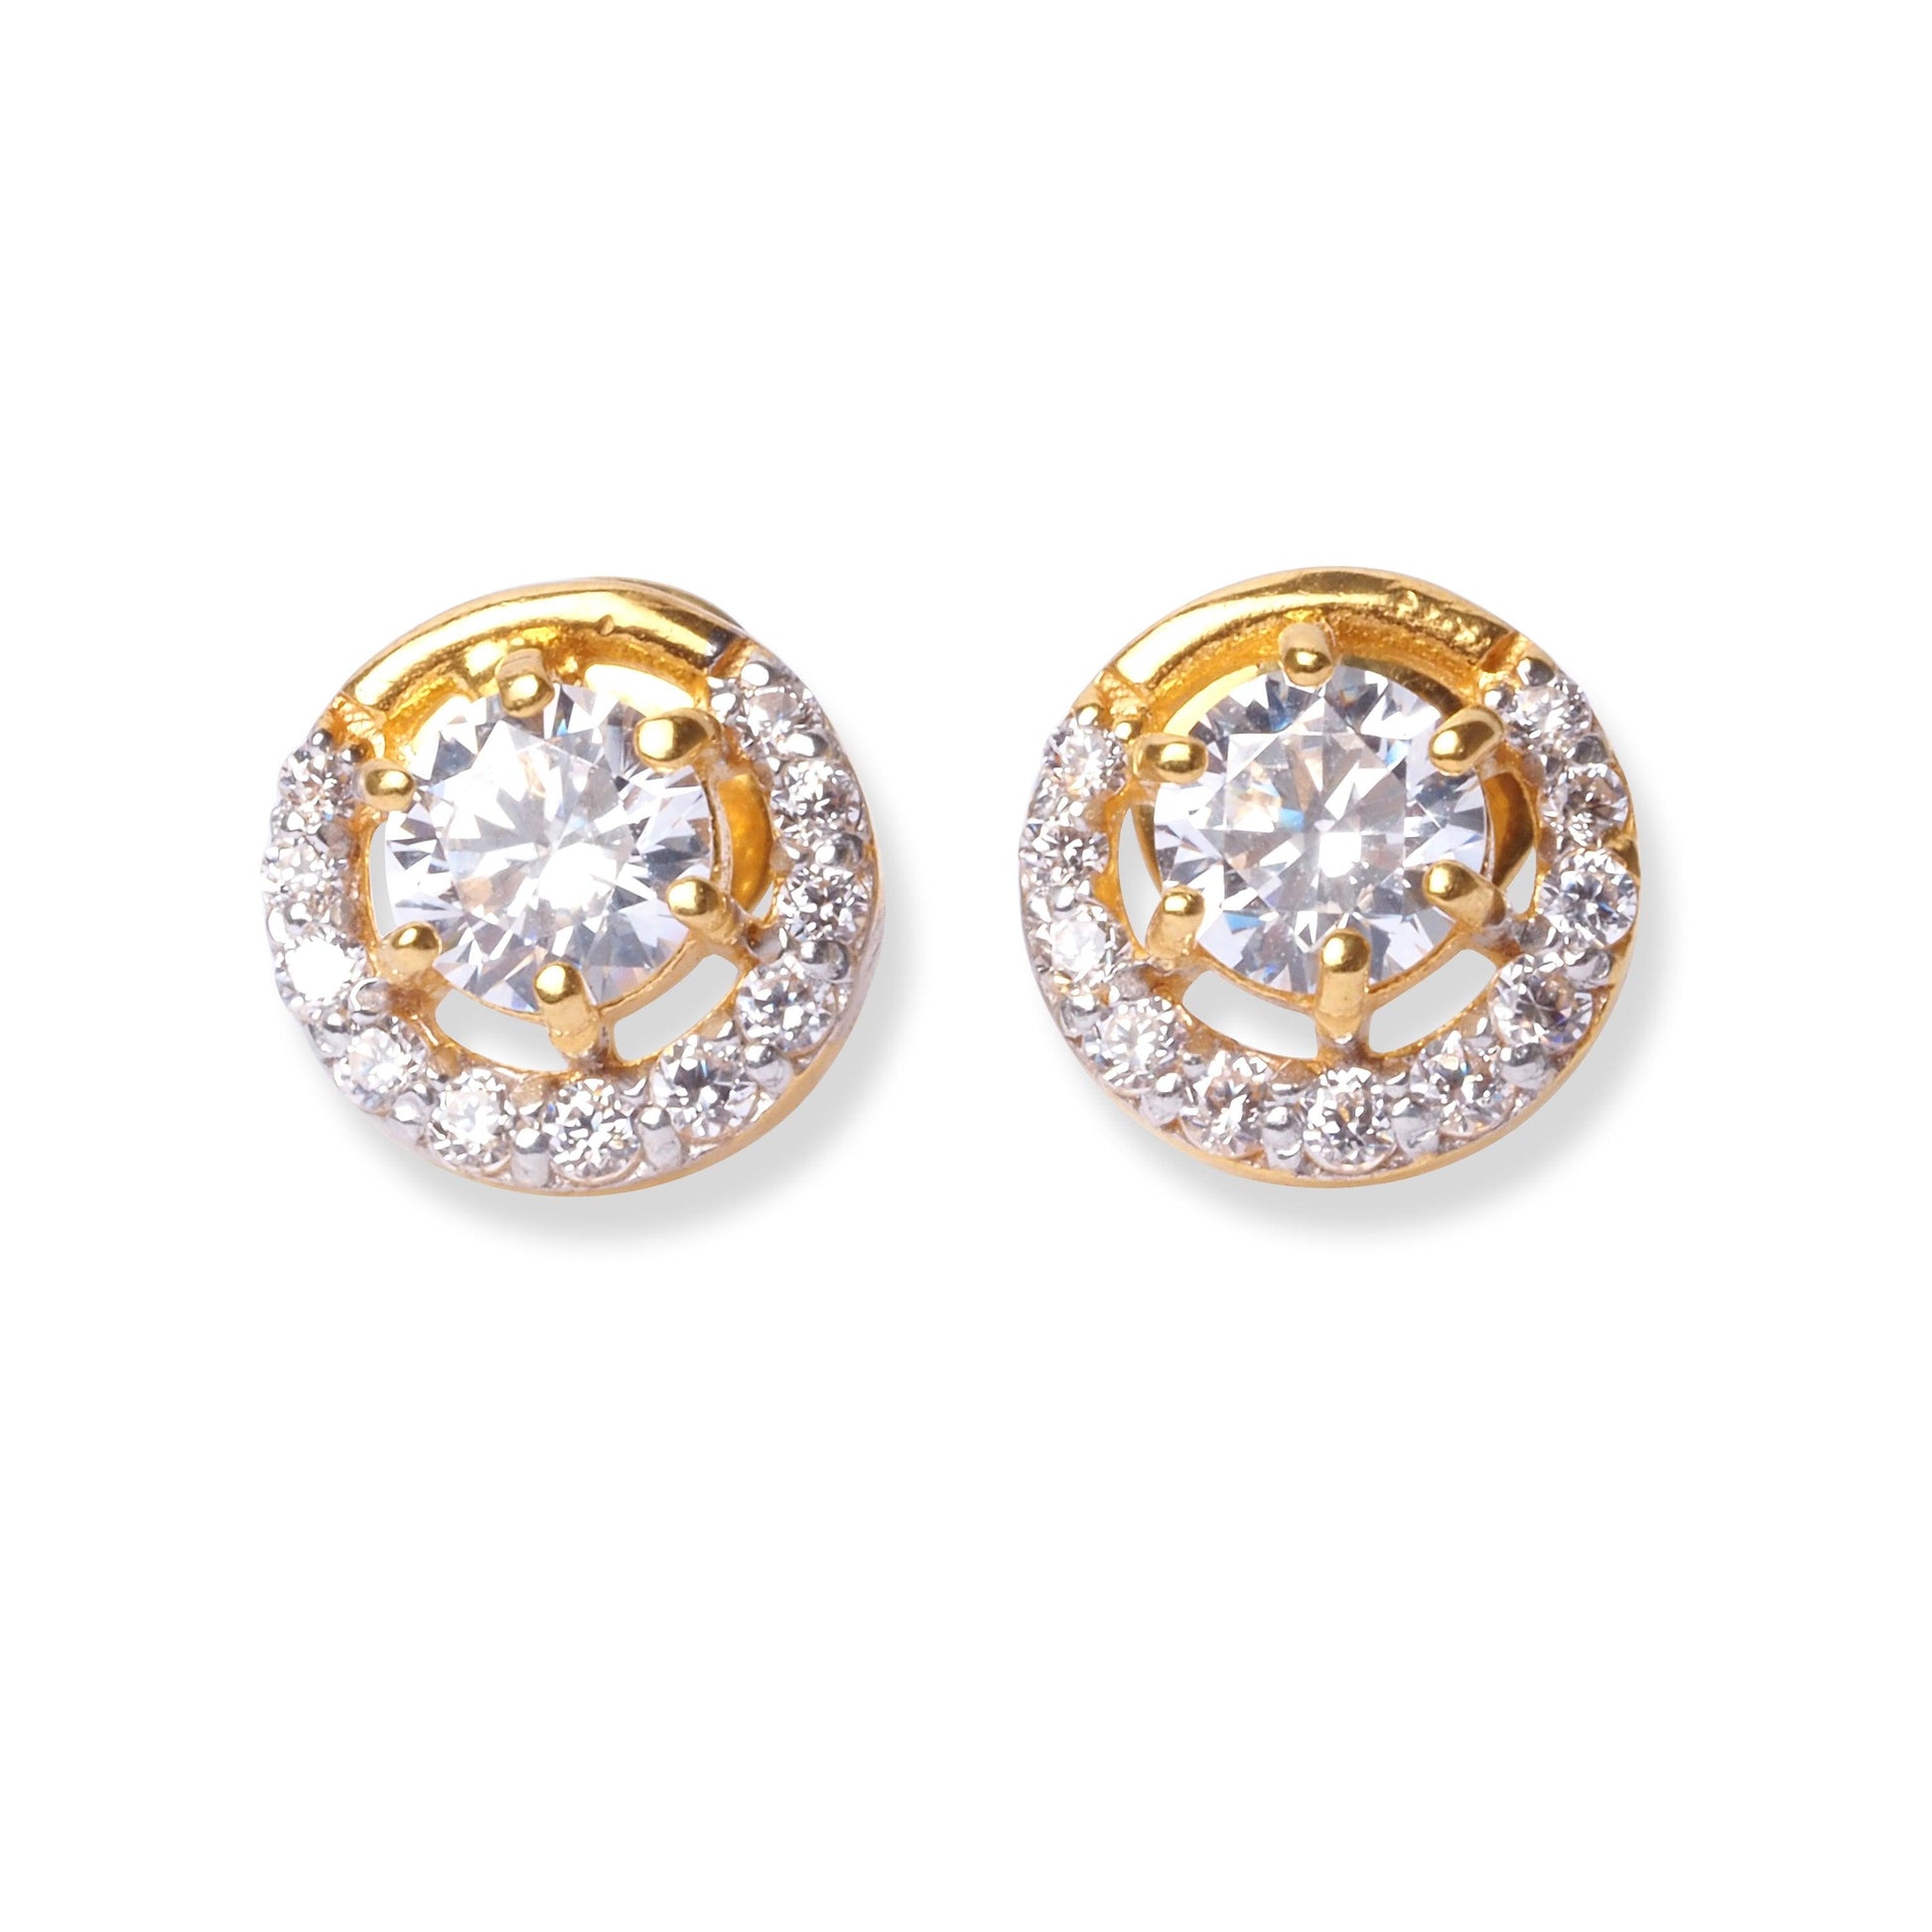 22ct Gold Stud Earrings with Cubic Zirconia Stones E-7971 - Minar Jewellers